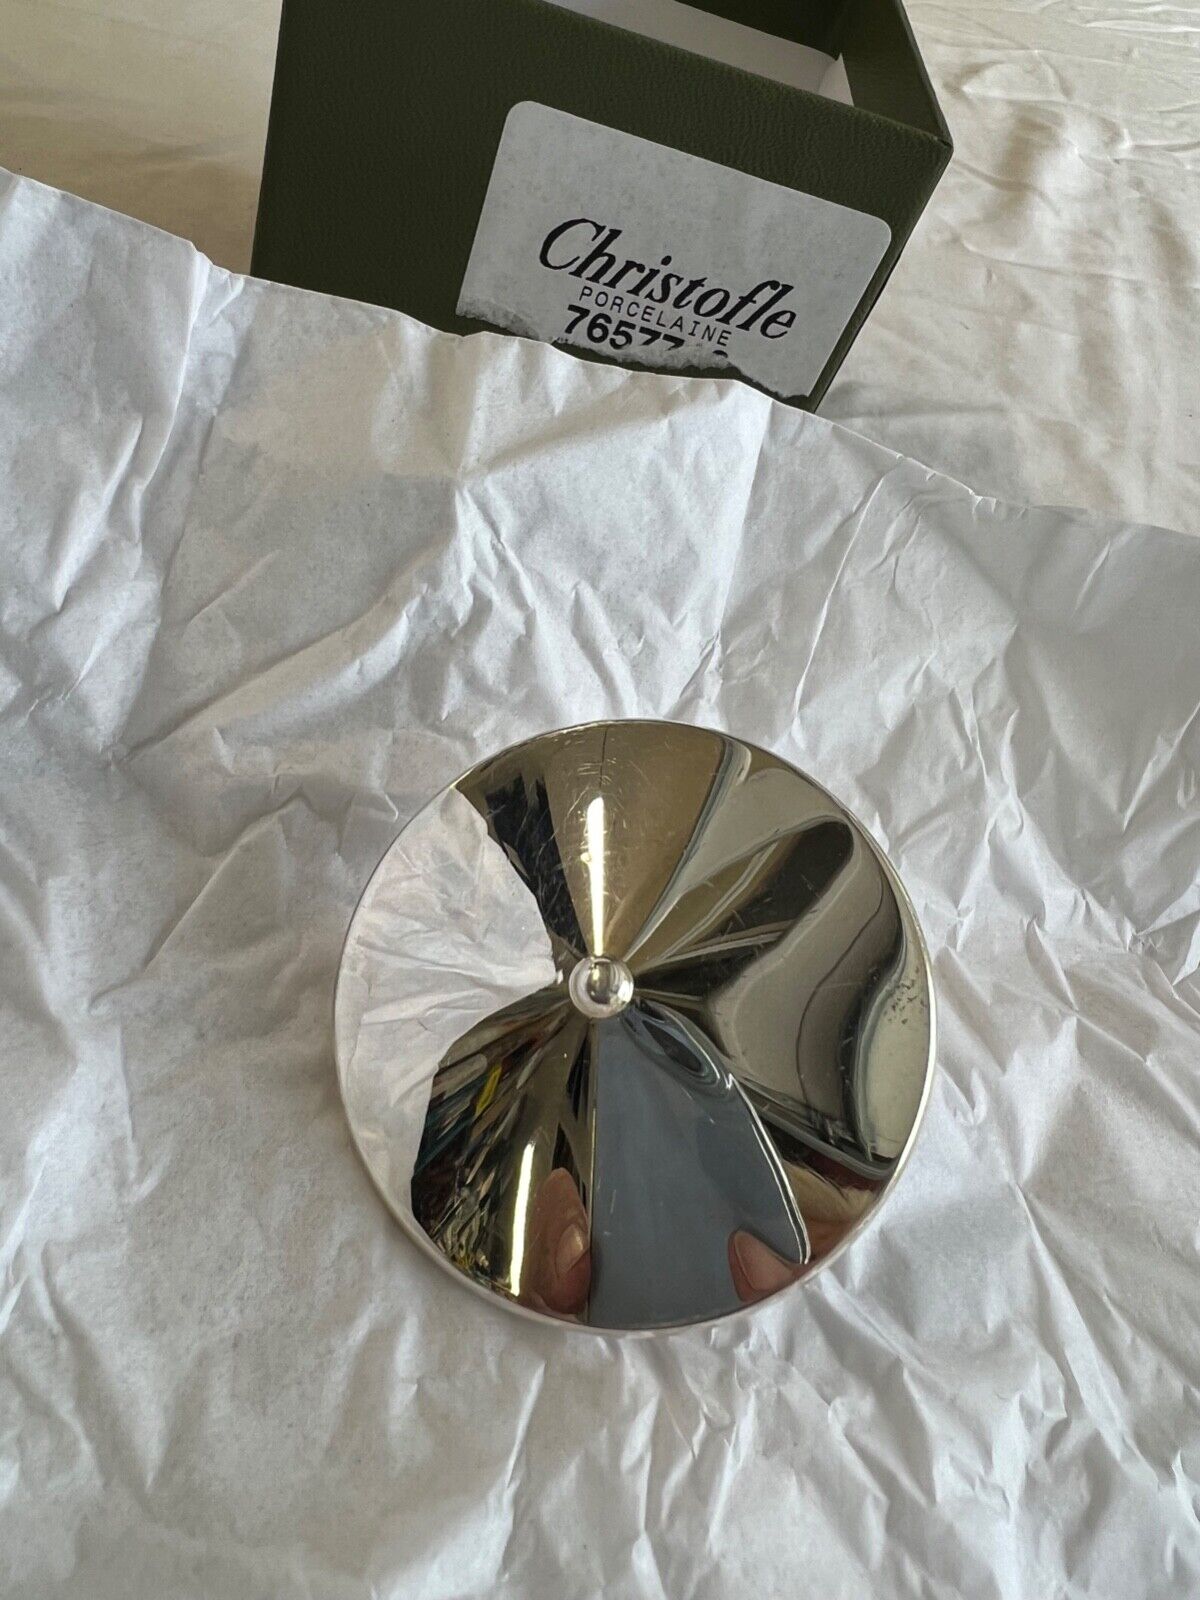 Christofle Paris Silverplated Spinning Top, PaperWeight in Original Box